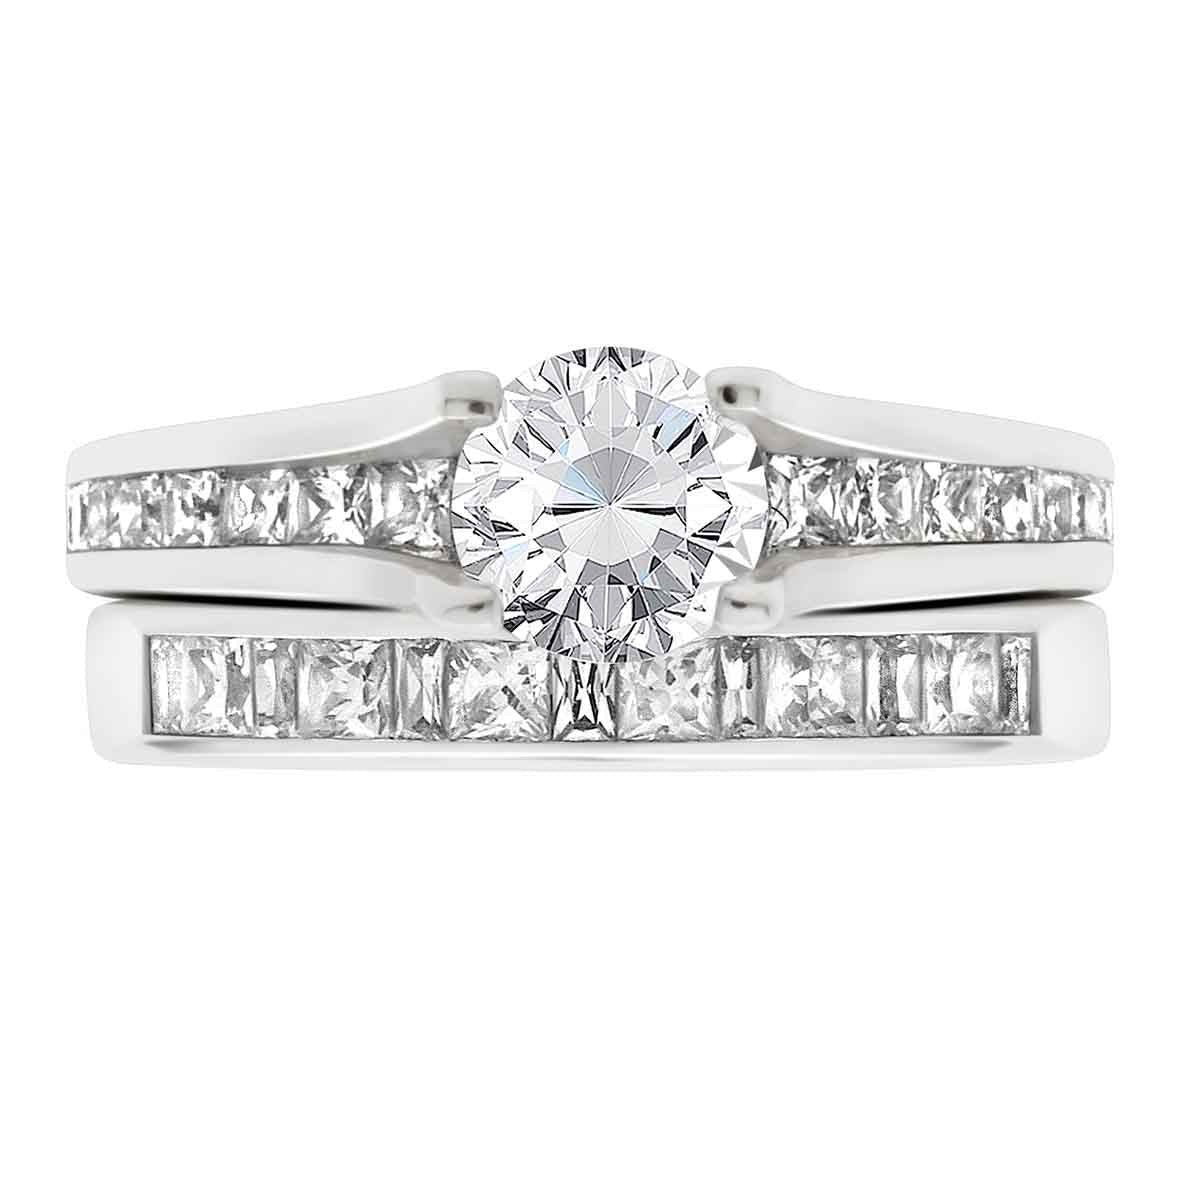 Channel Set Diamond Ring set in white gold with a matching diamond wedding ring